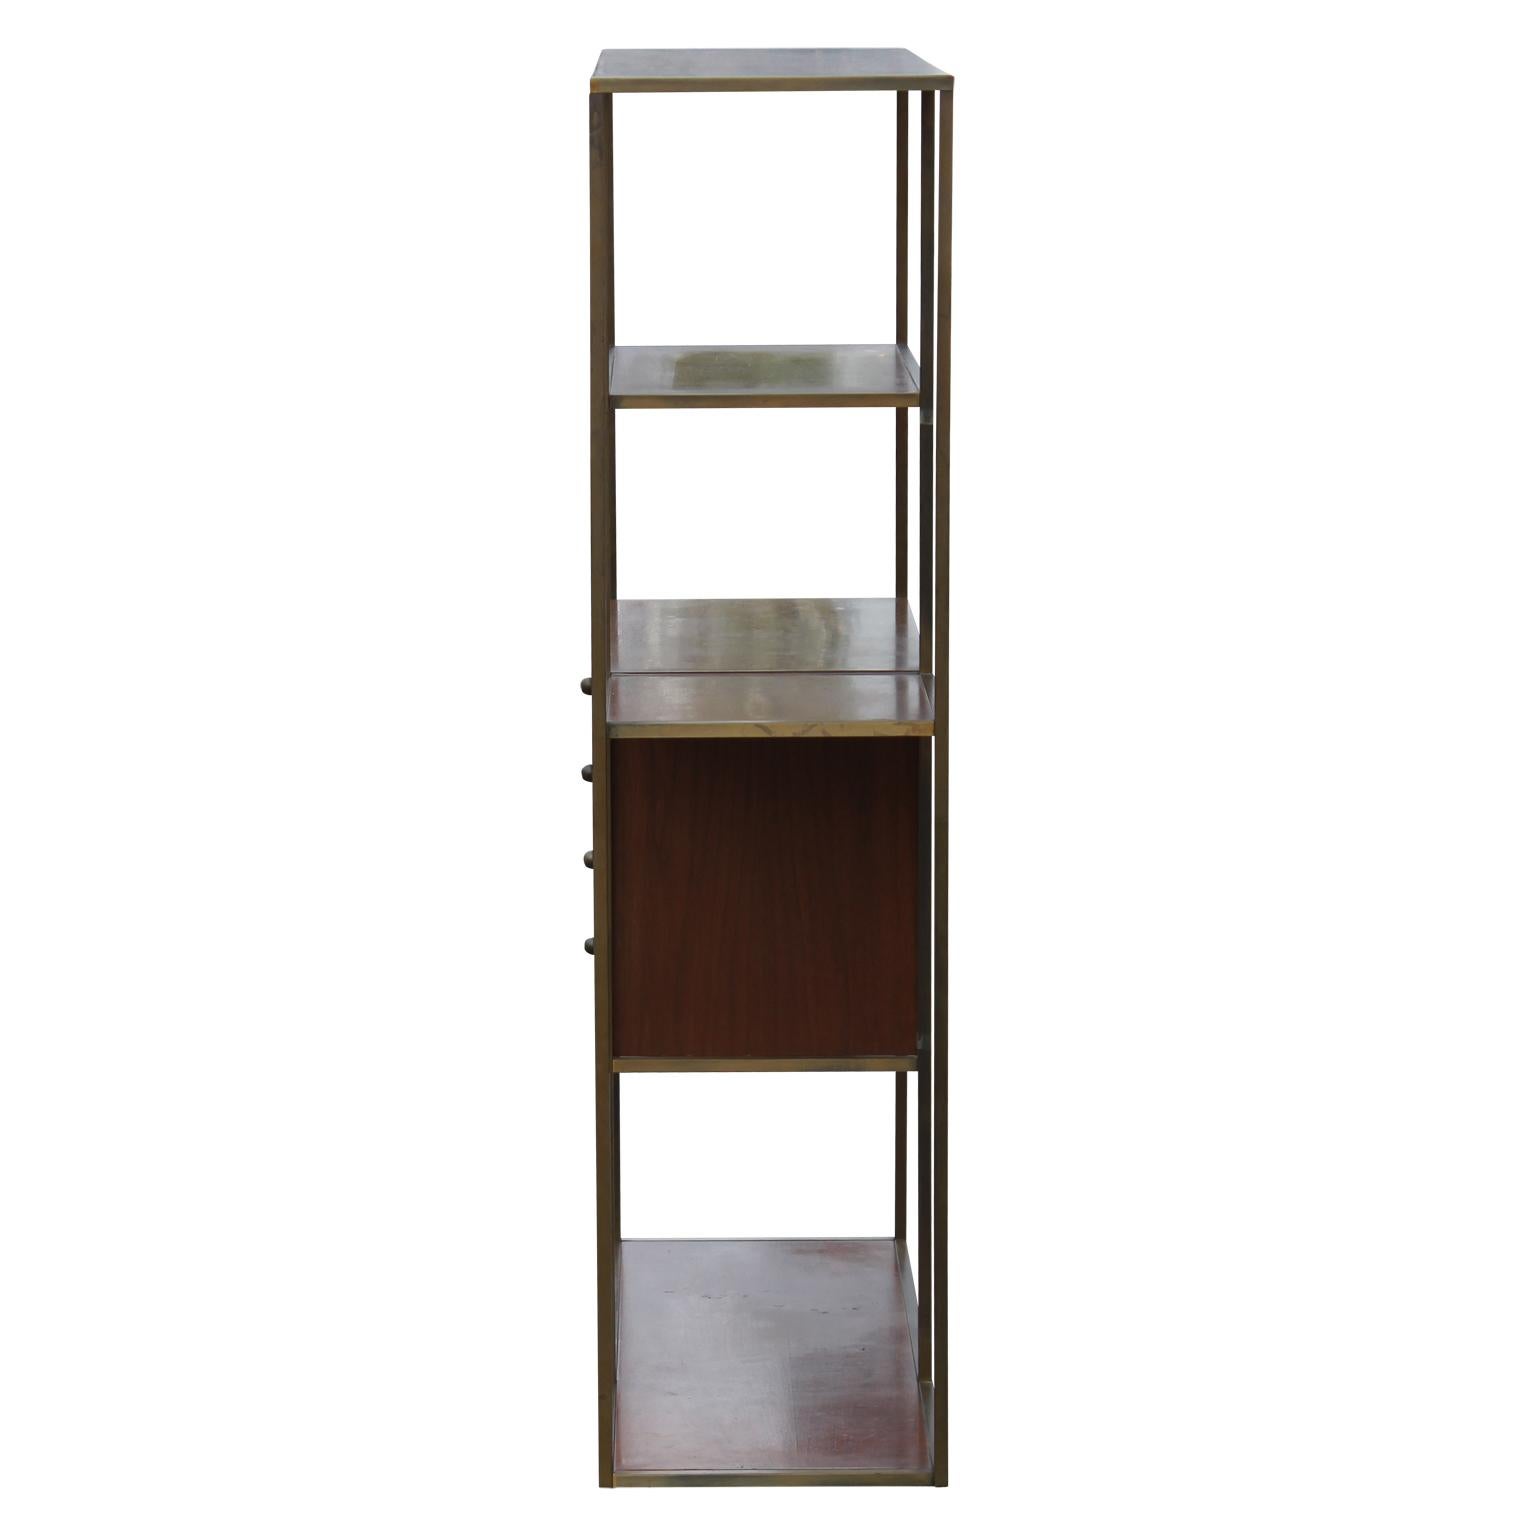 Mid-20th Century Modern Brass and Walnut Calvin Bookcase or Room Divider by Paul McCobb